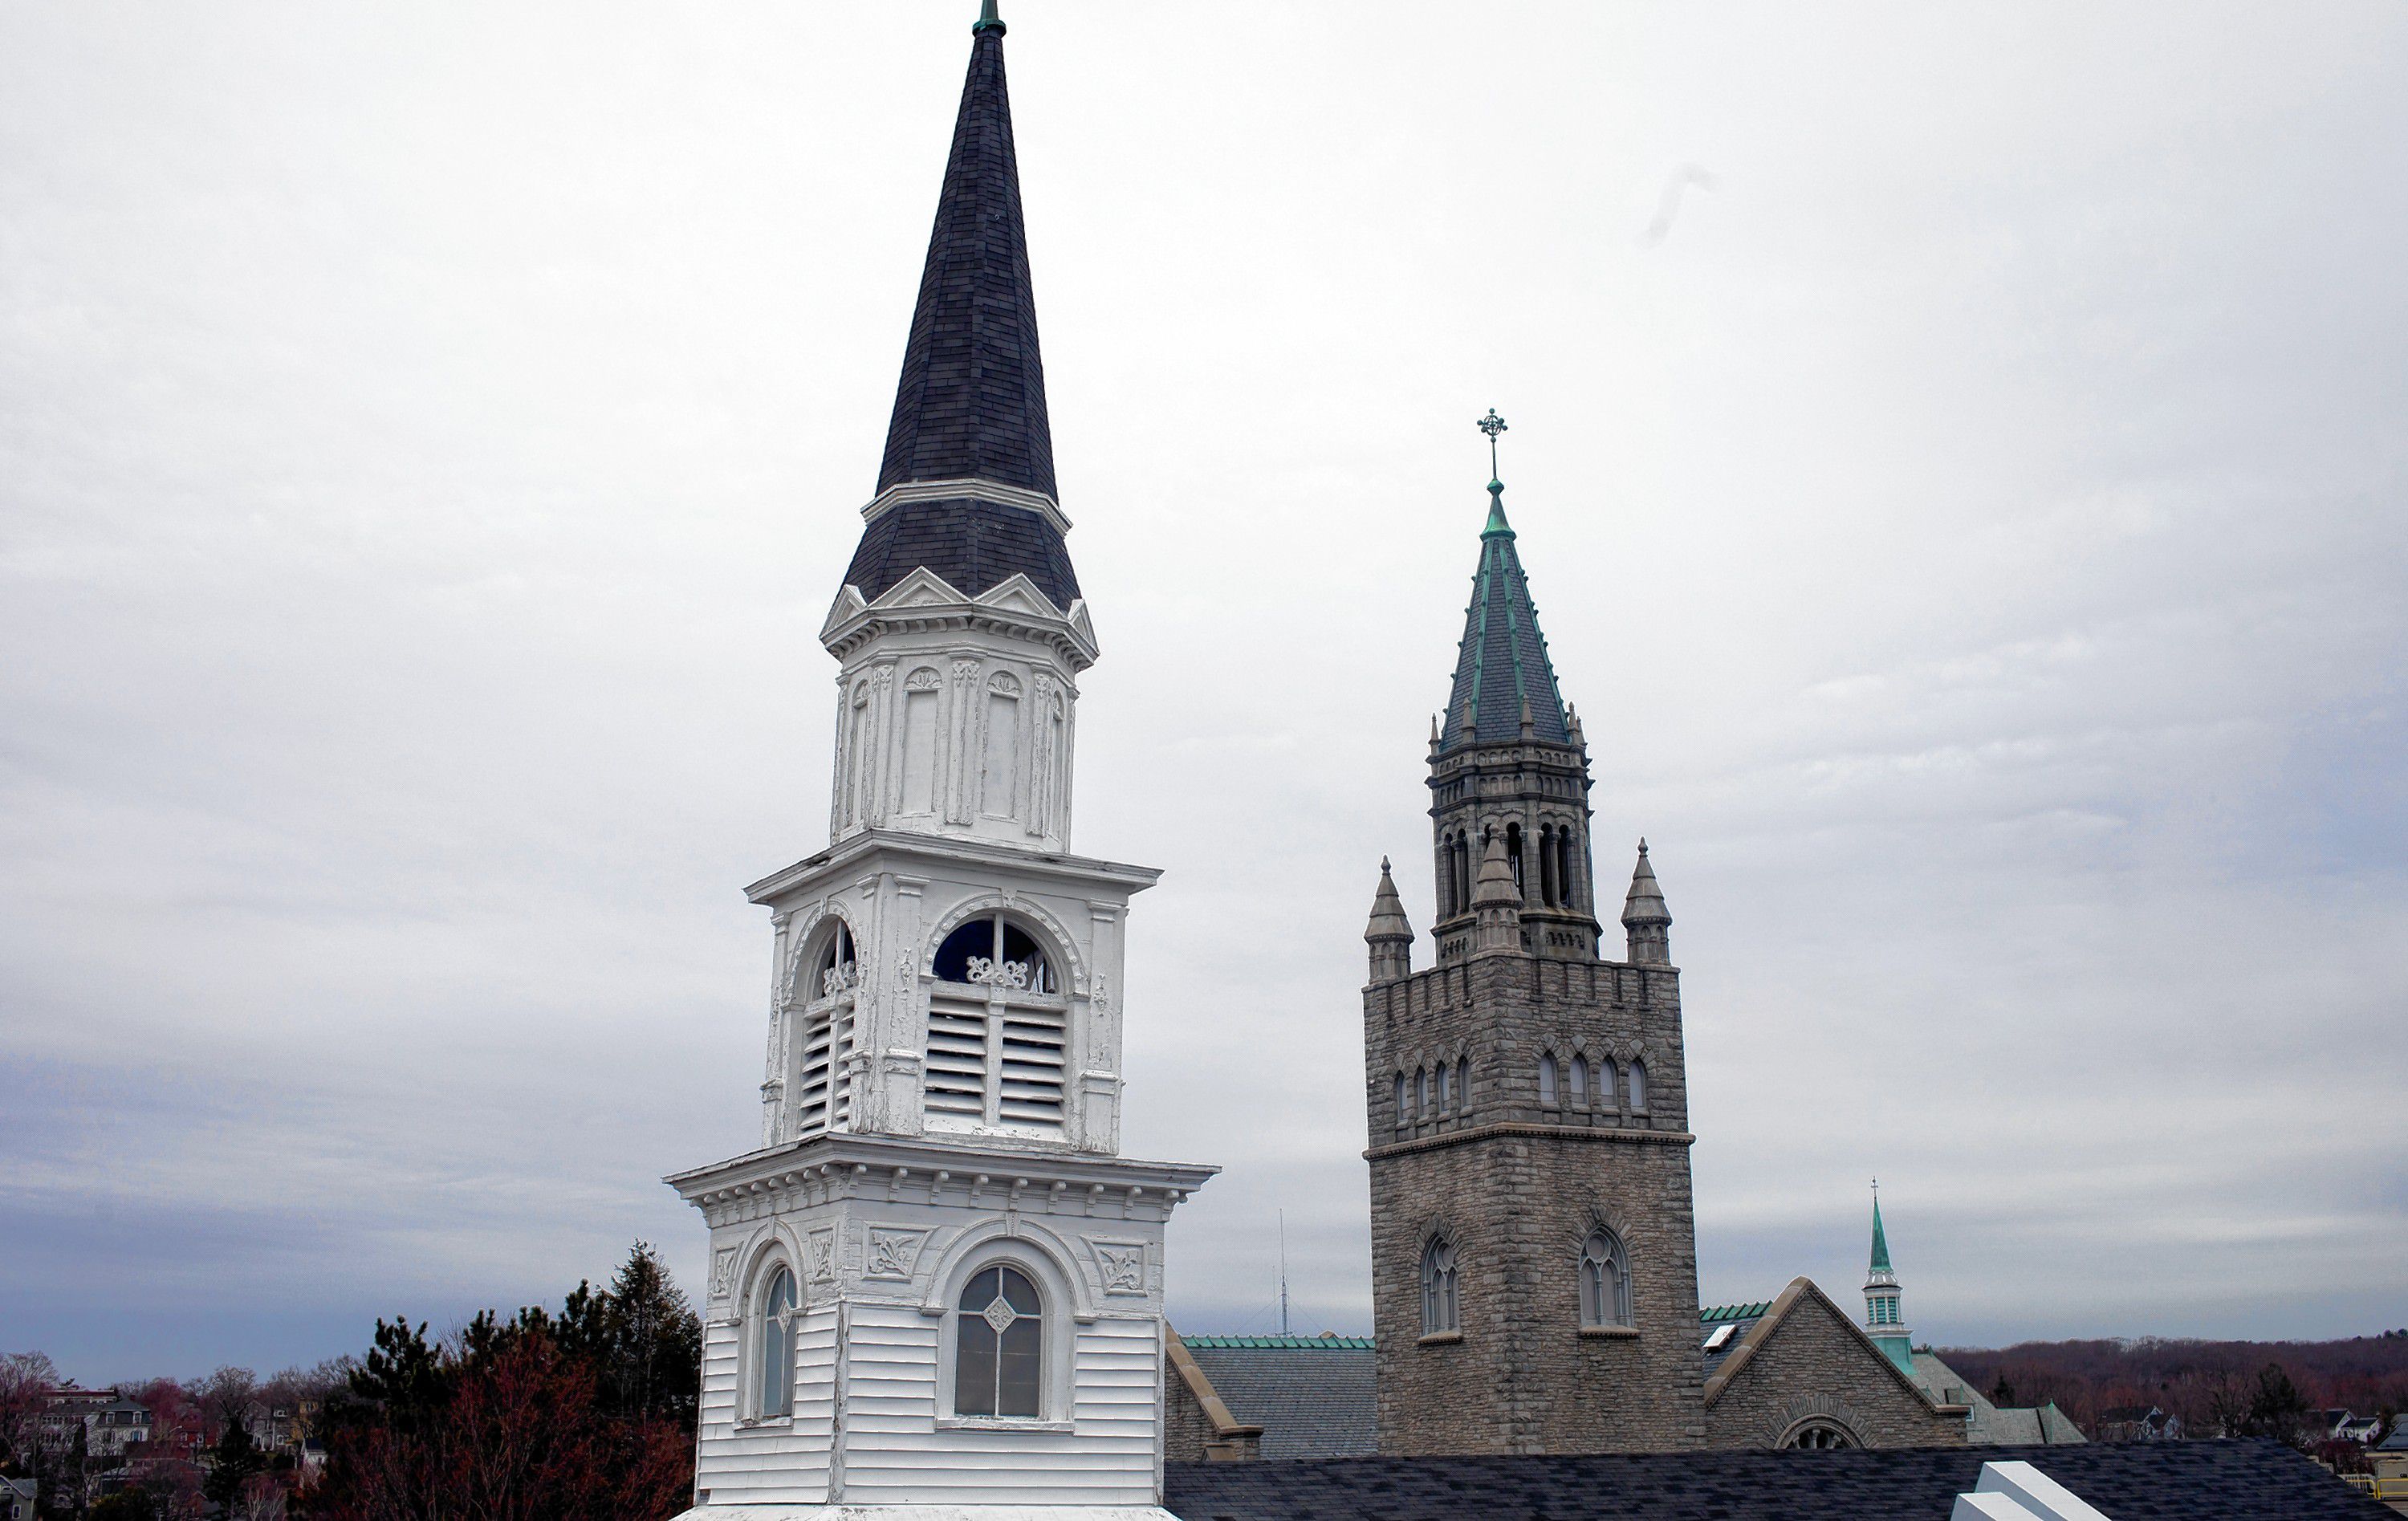 The steeples from Centerpoint Baptist Church (left) and The First Church of Christ, Scientist in downtown Concord on Thursday evening, April 19, 2019.